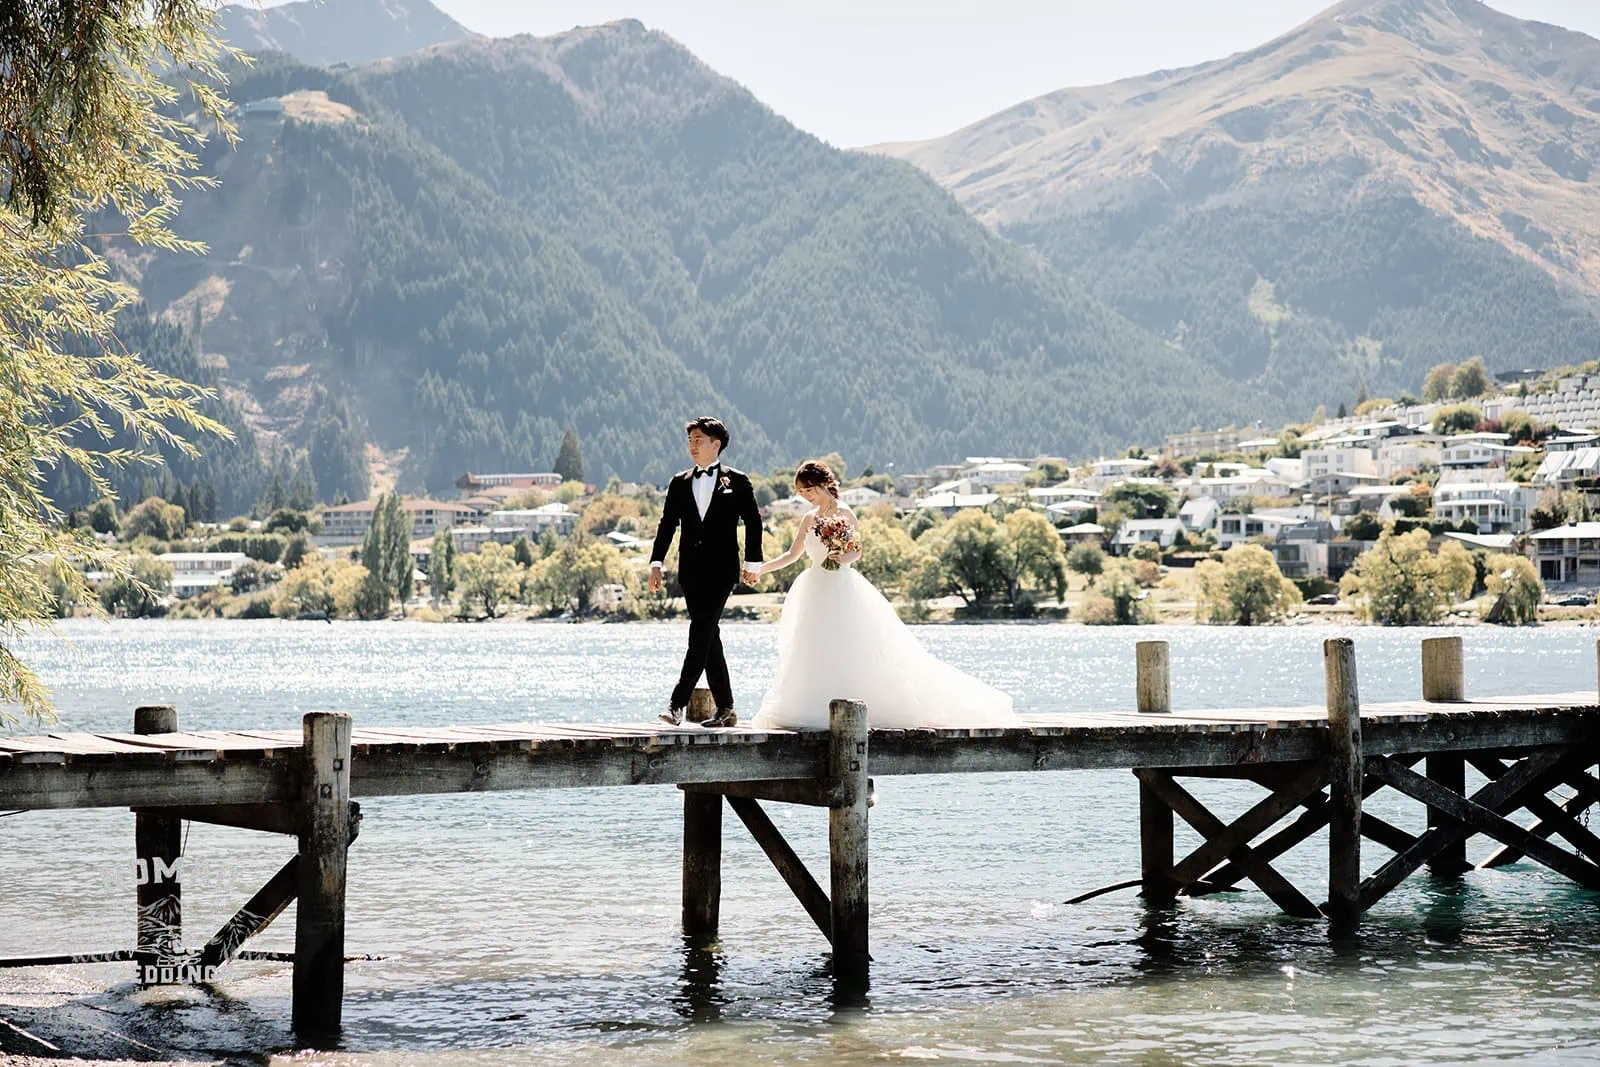 Queenstown New Zealand Elopement Wedding Photographer - A bride and groom standing on a dock in front of mountains - SUMMER EDITION.